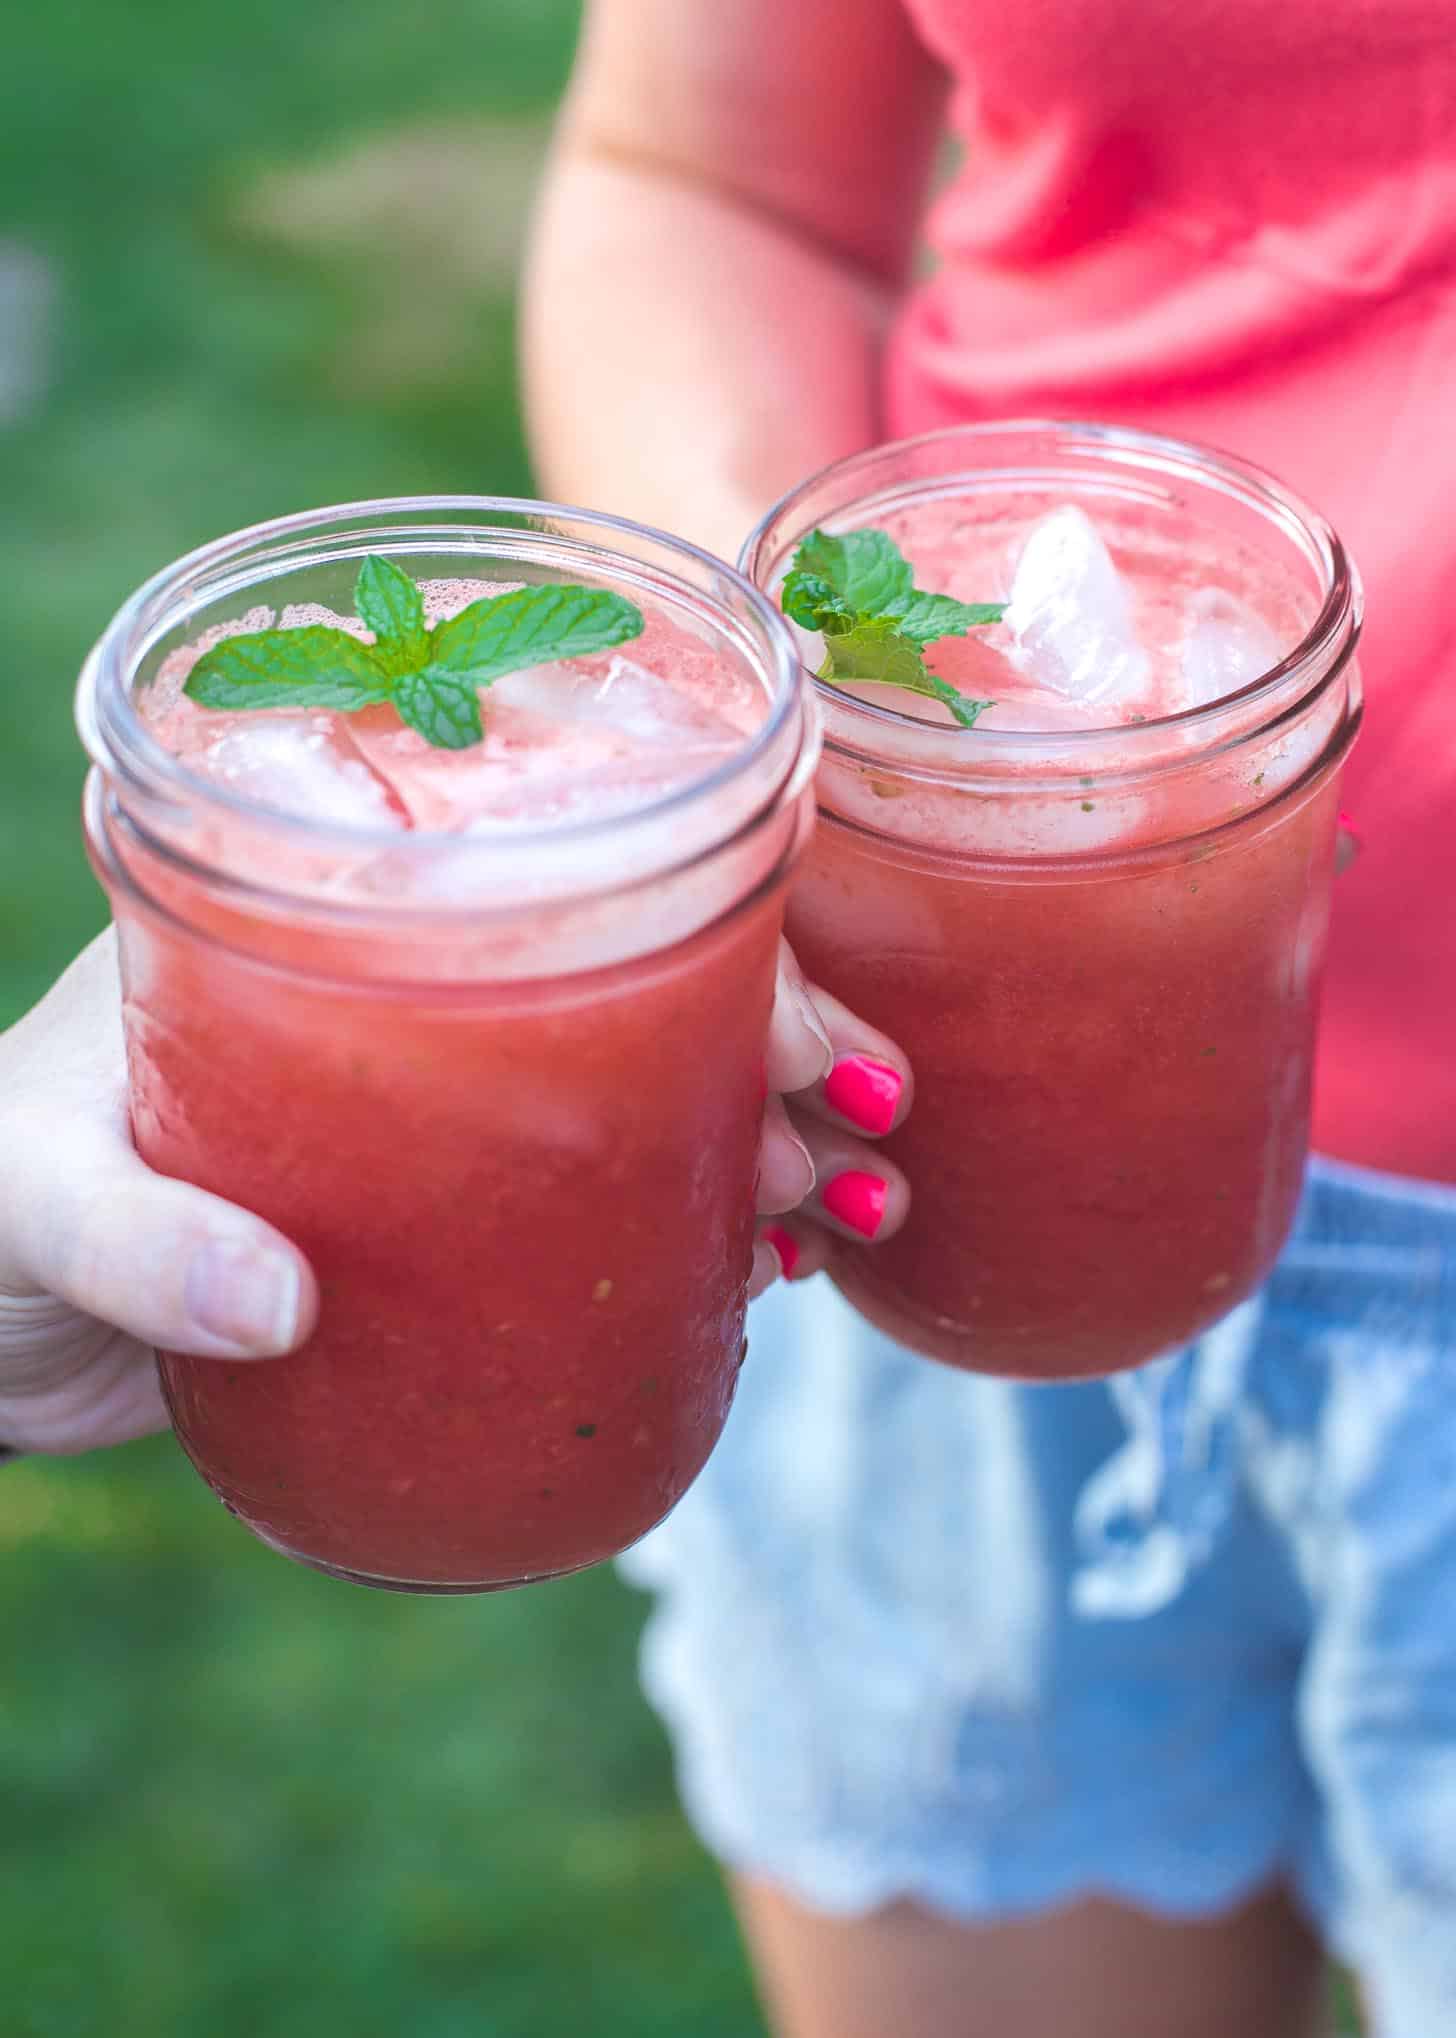 drinks in glass jars with a sprig of mint